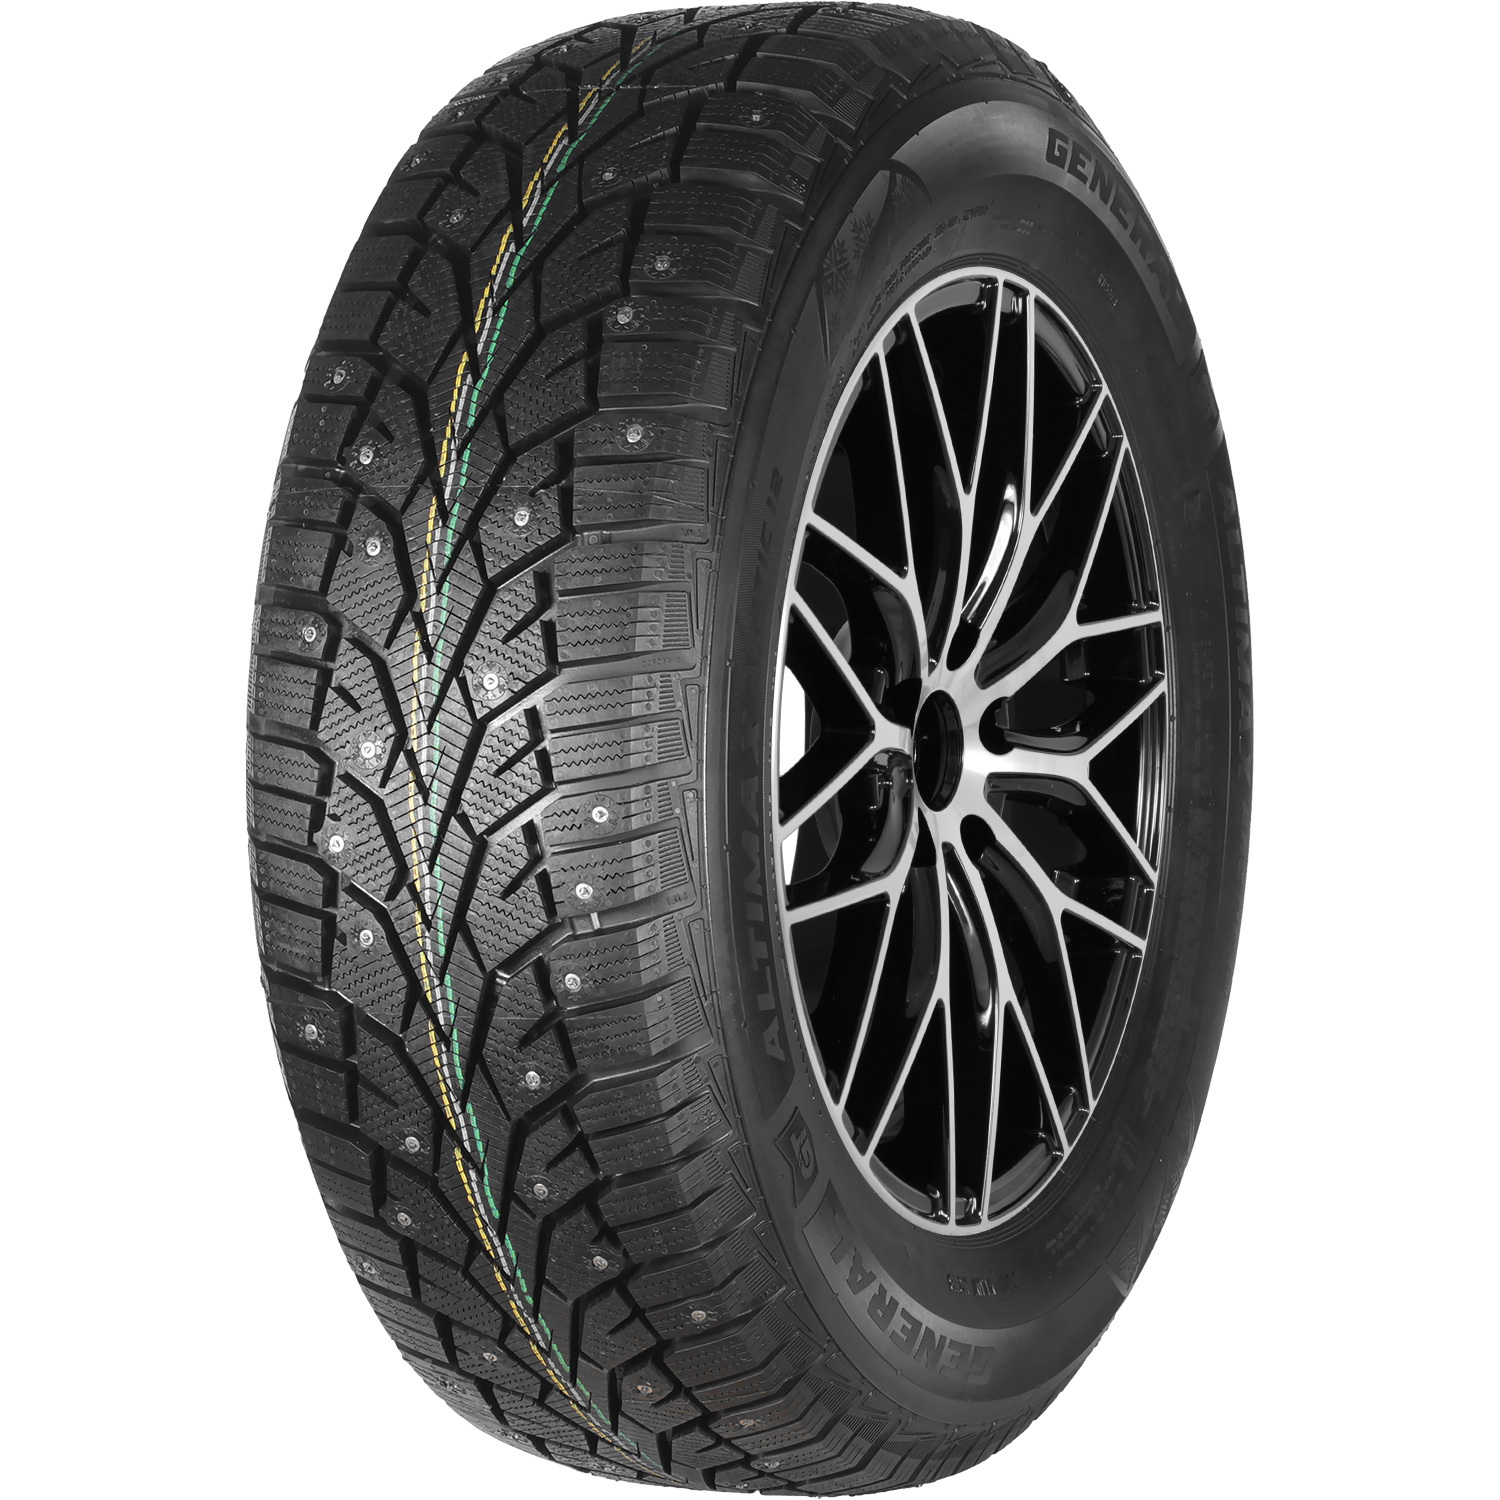 Автомобильная шина General Tire Altimax Arctic 12 185/70 R14 92T Шипованные tire cover central ocean sunrise sun moon spare tire cover select tire size back up camera in menu custom sized to any